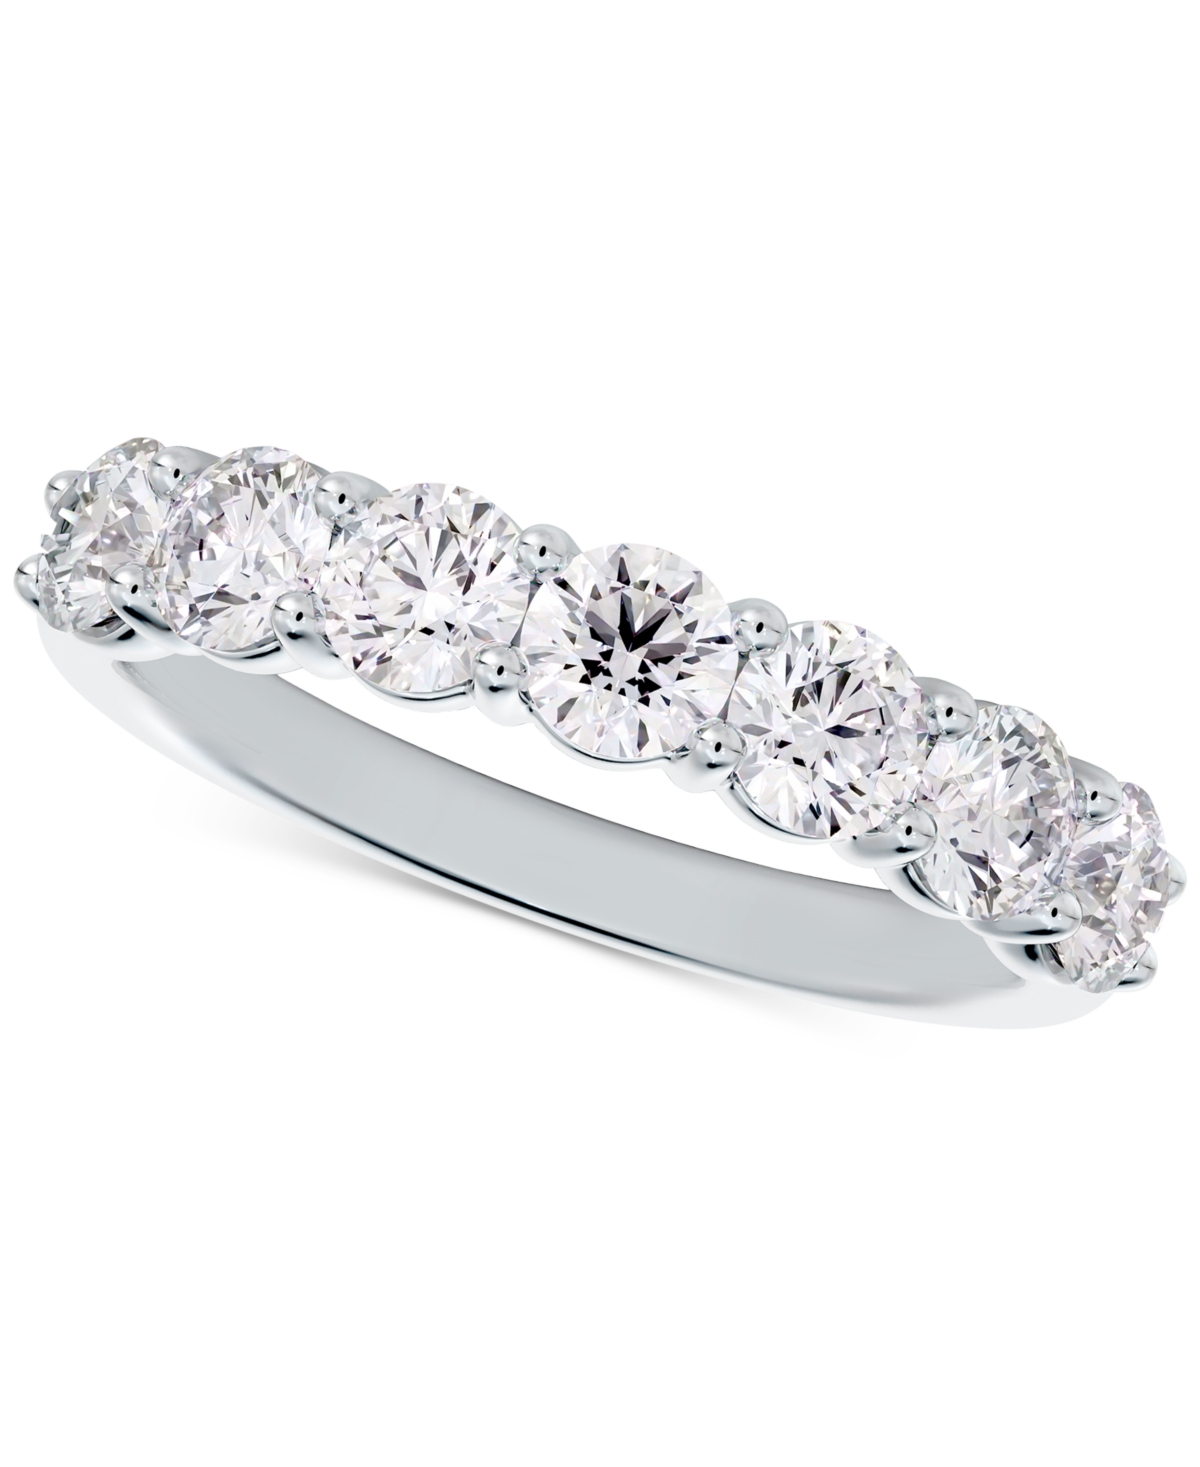 Portfolio by De Beers Forevermark Diamond Seven Stone Band (3/4 ct. t.w.) in 14k White Gold - White Gold